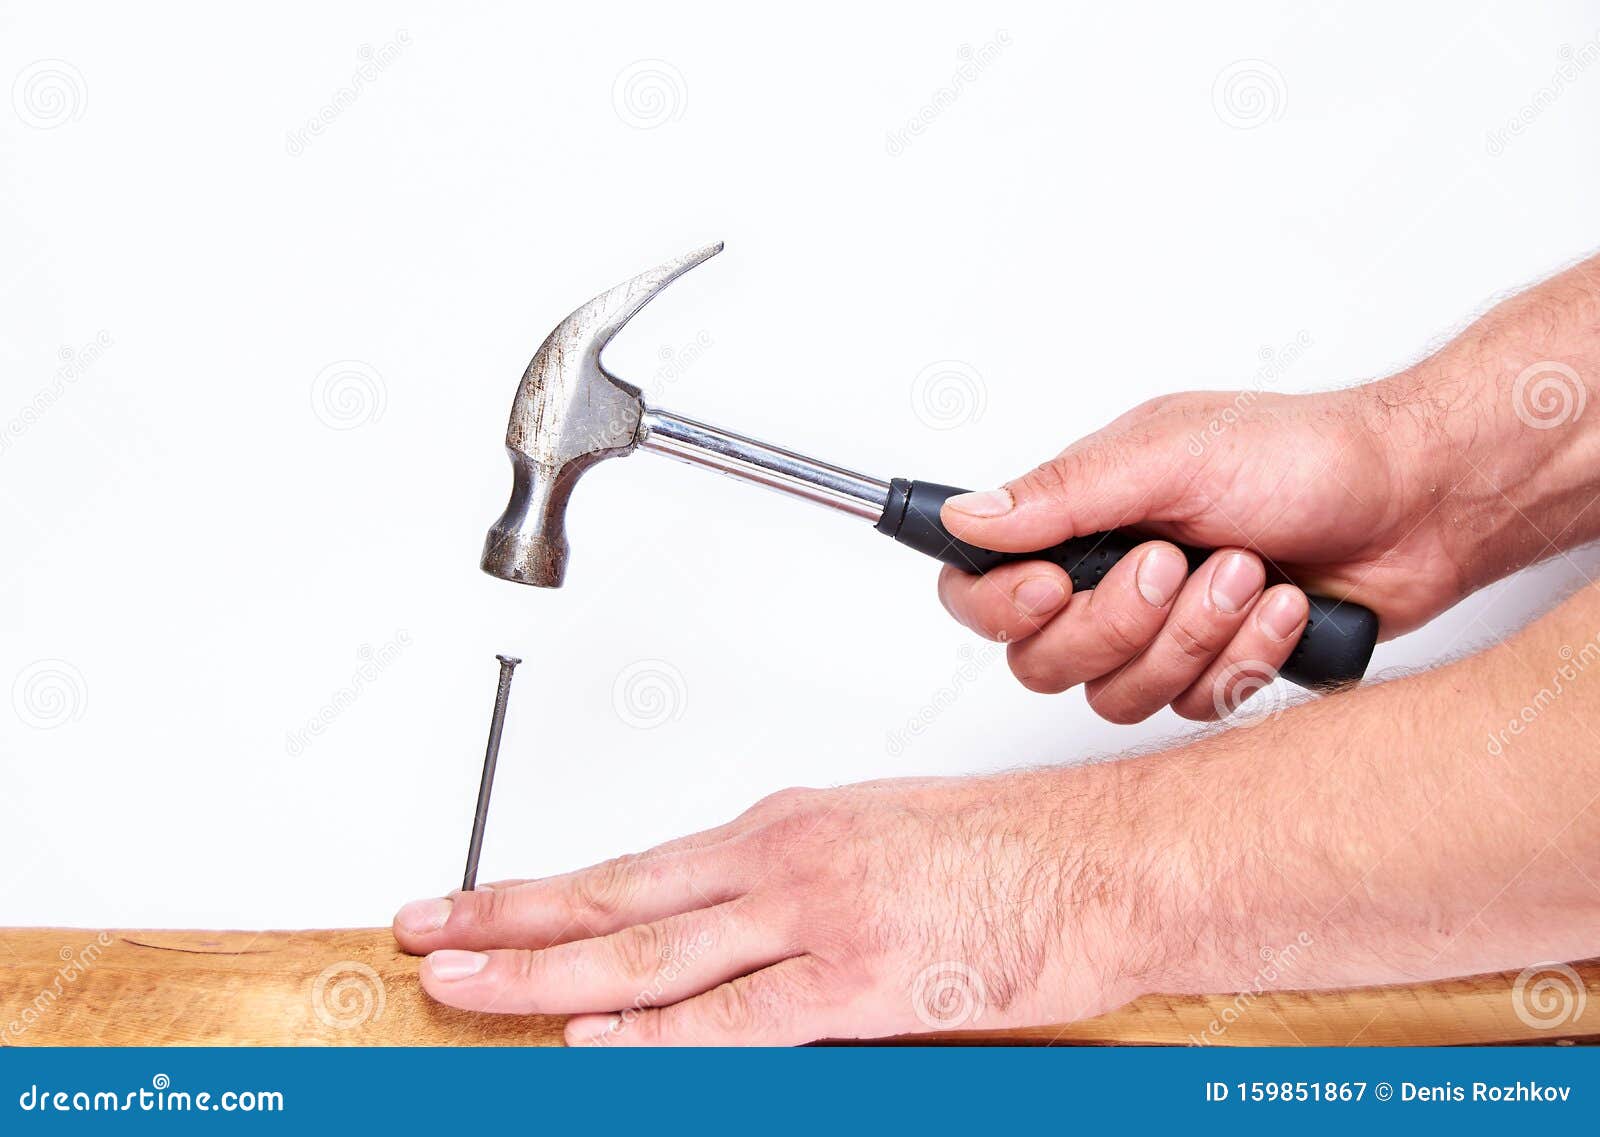 Hammering a Nail Clip Art Free - wide 6